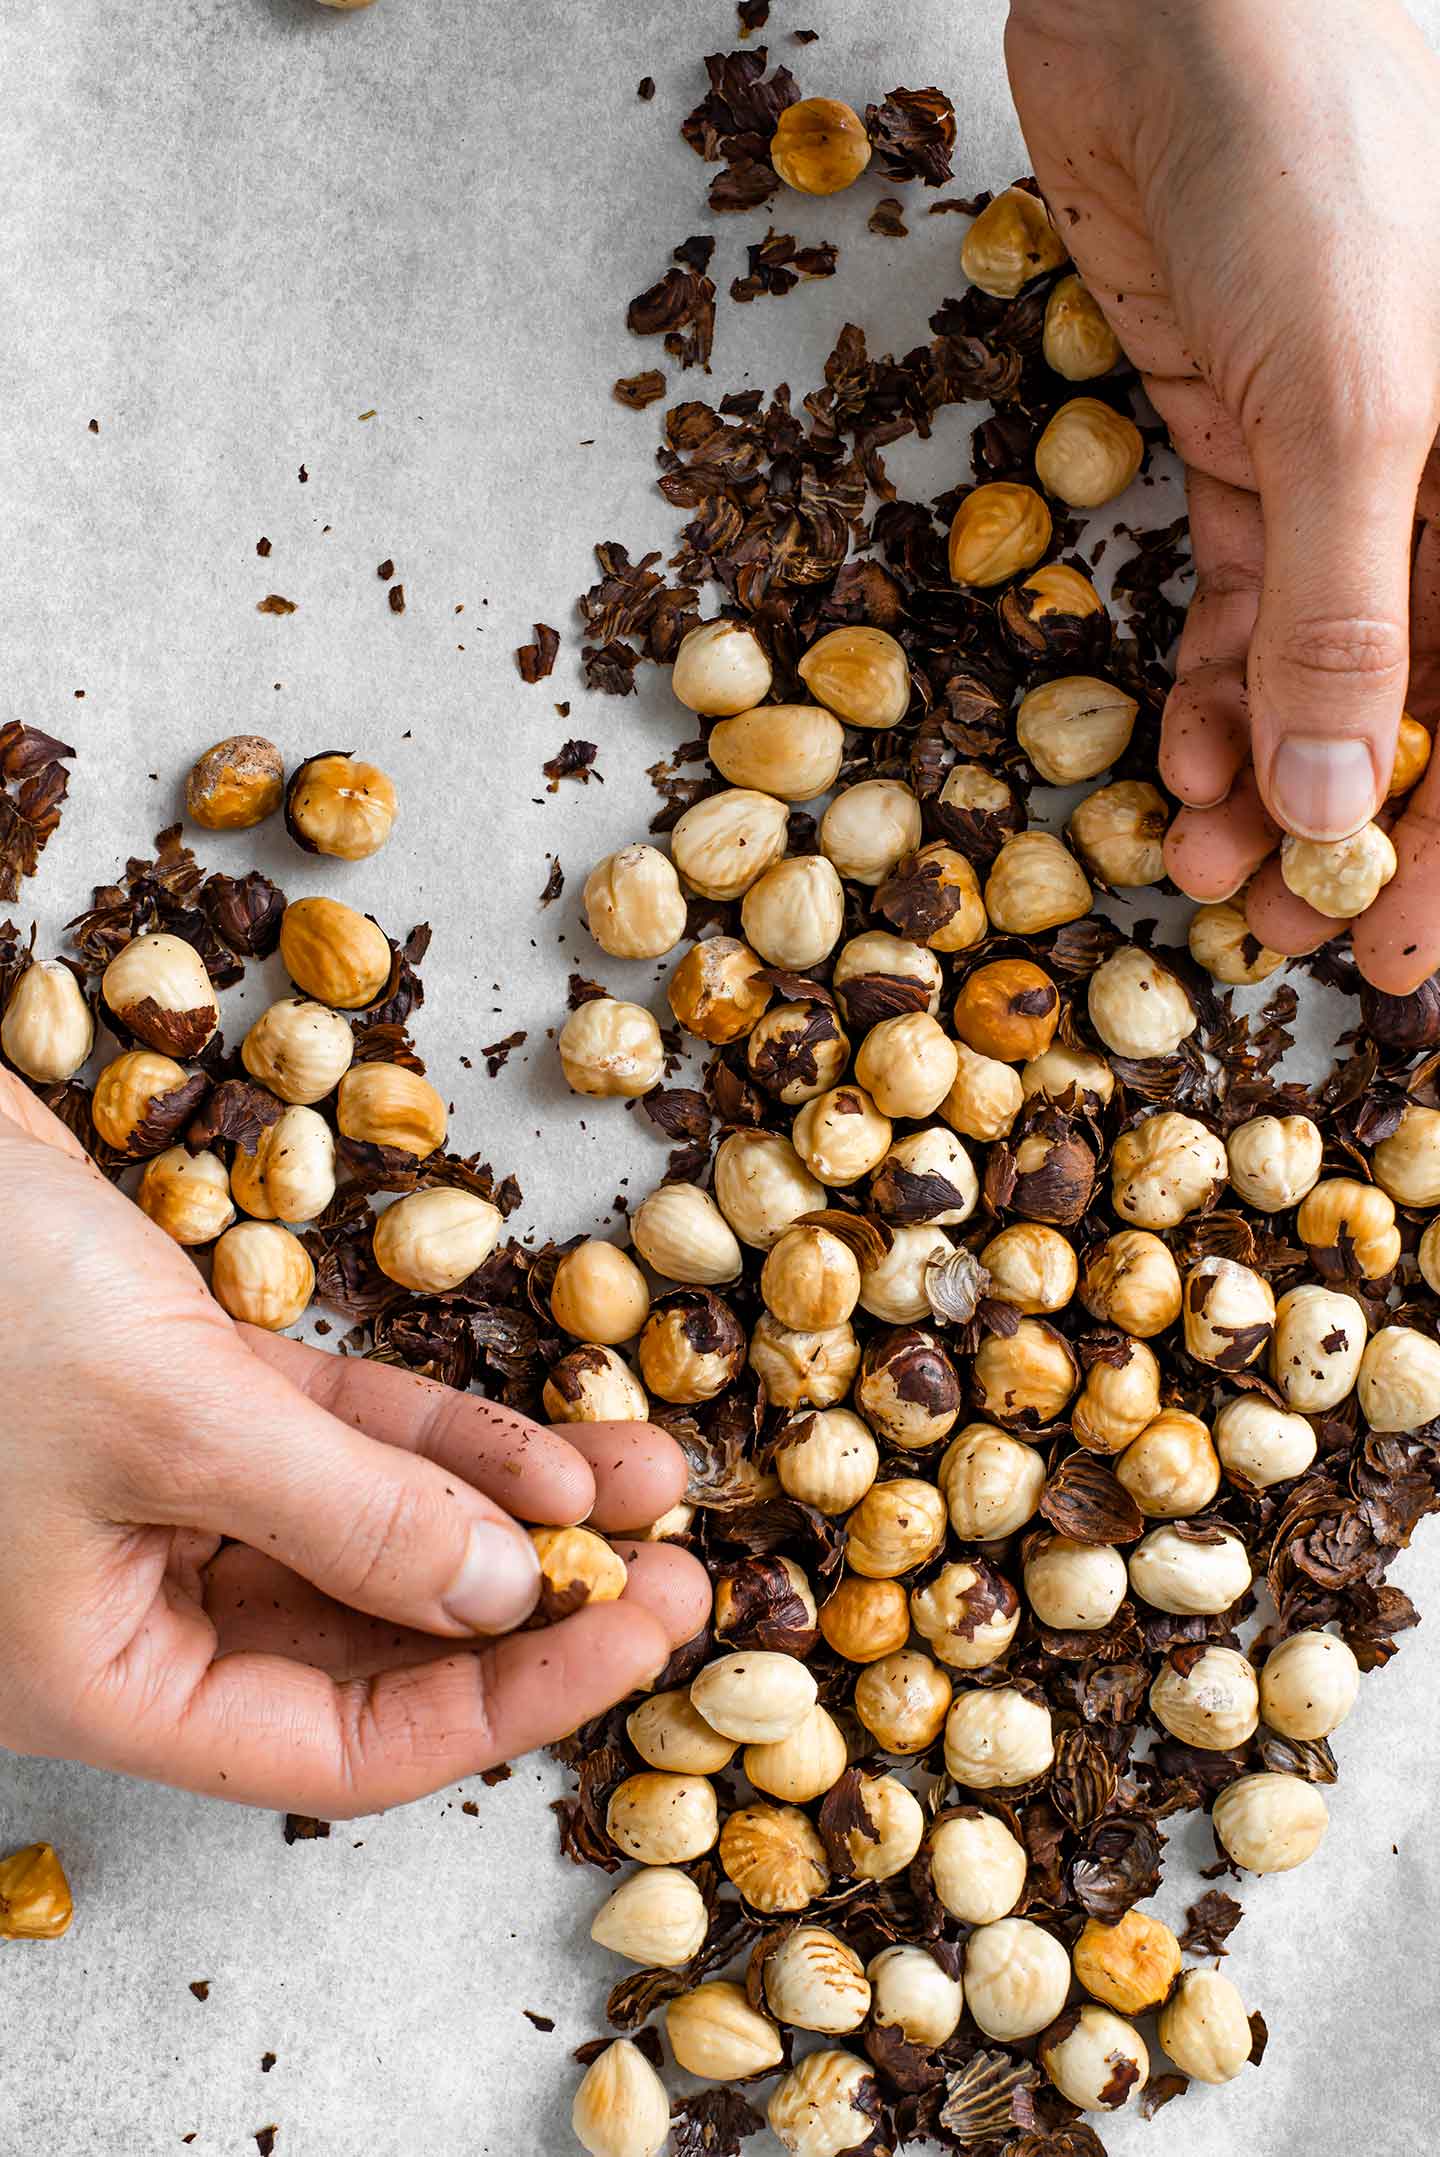 Top down view of hands rubbing the skins from the roasted hazelnuts.